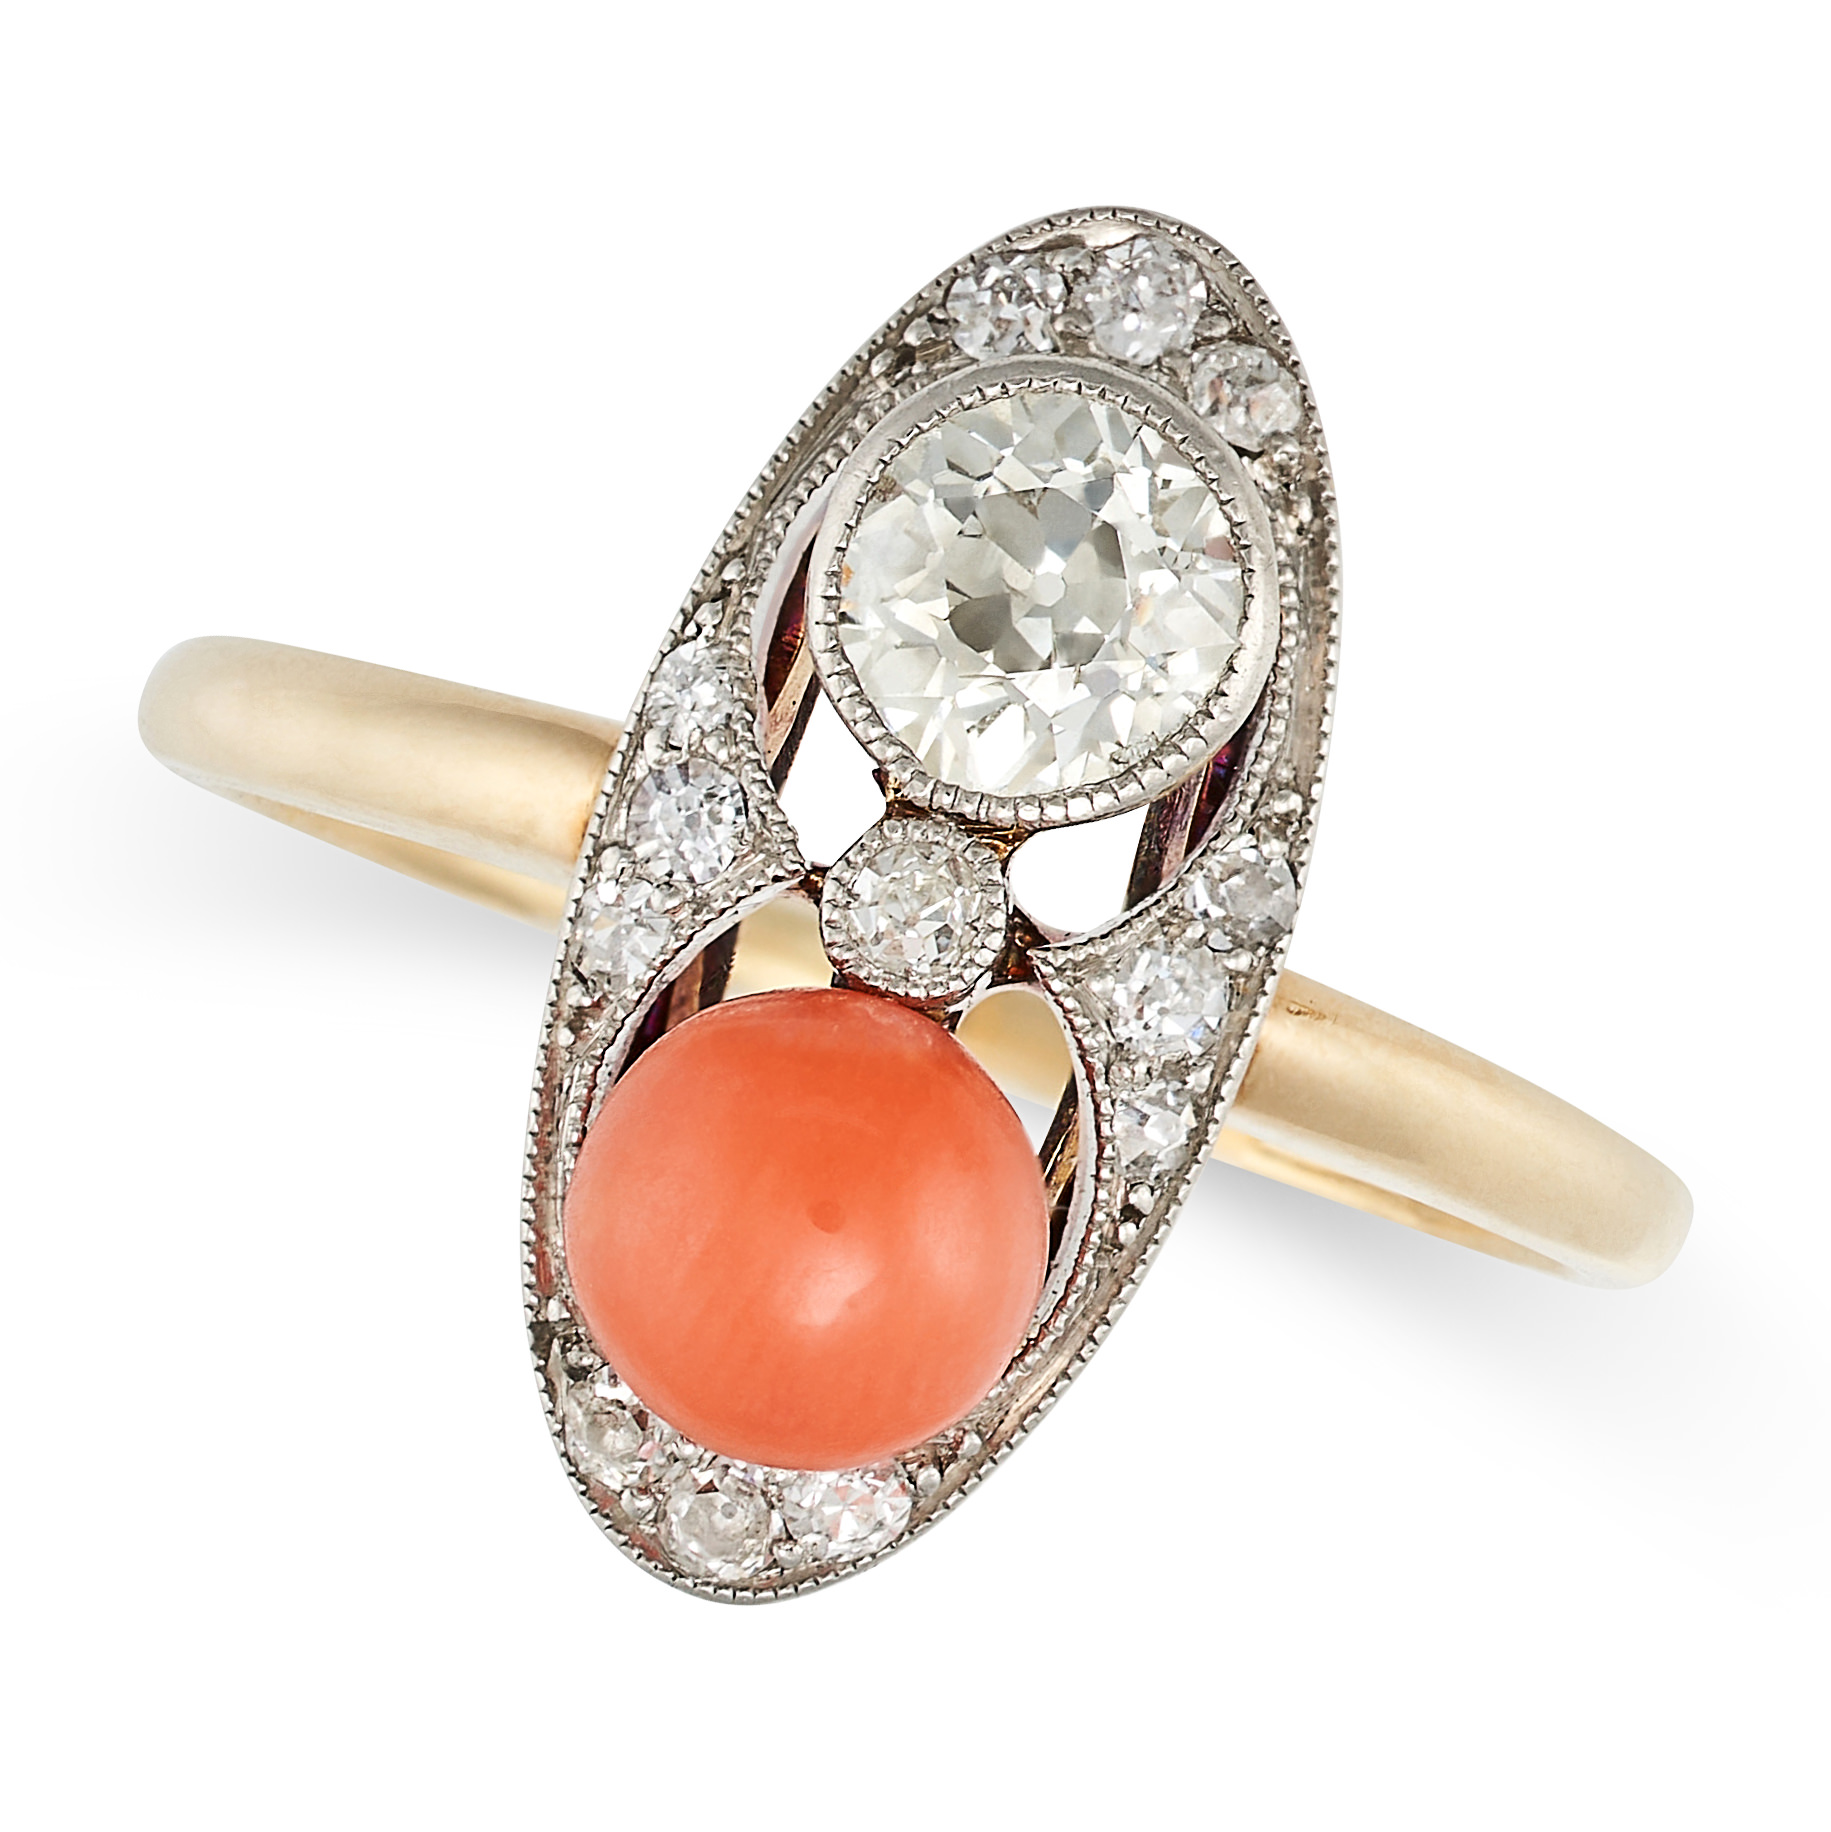 AN ANTIQUE CORAL AND DIAMOND RING, EARLY 20TH CENTURY in 14ct yellow gold, the oval face set with